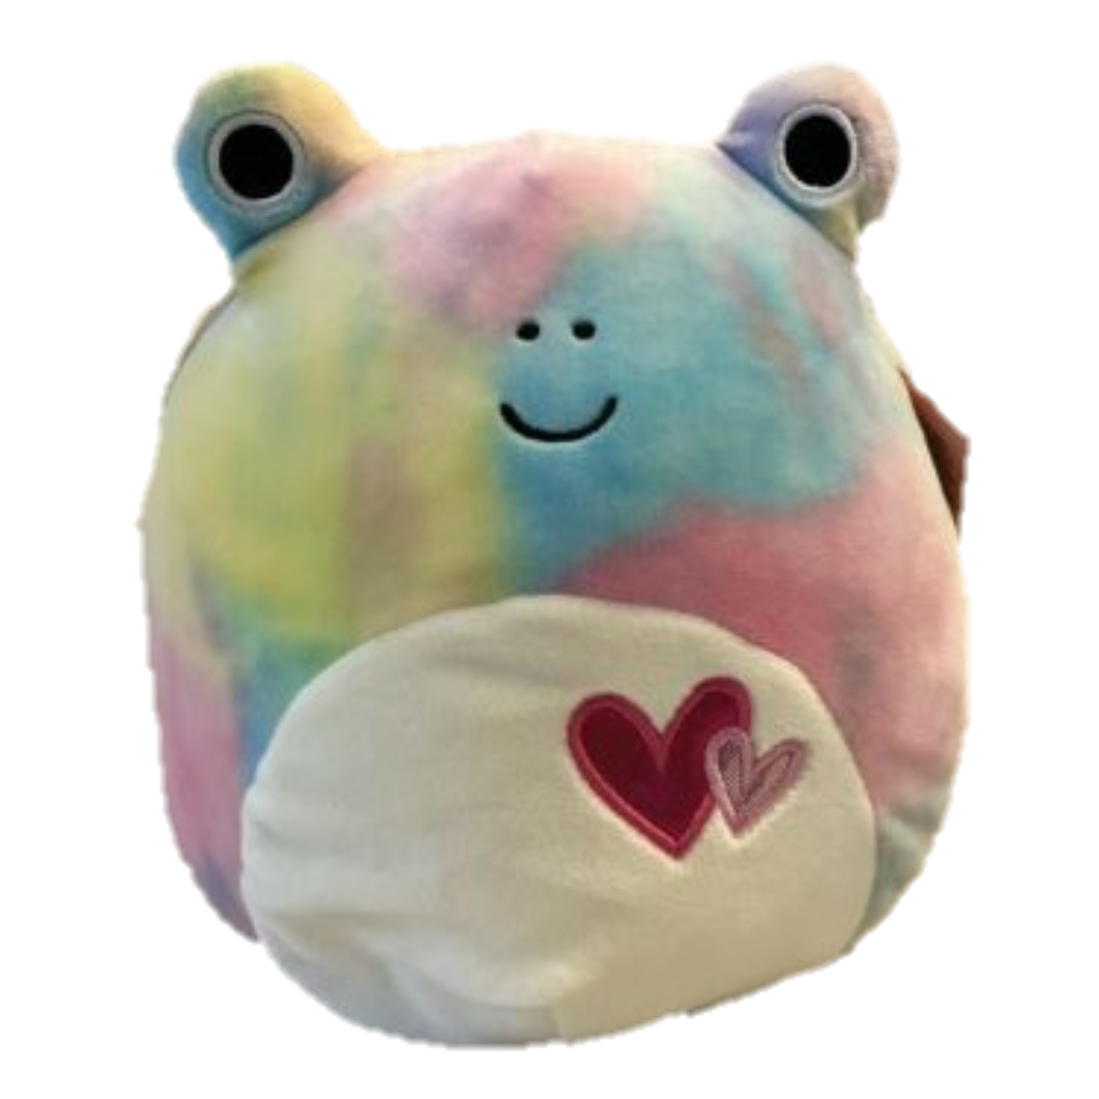 https://static.wikia.nocookie.net/squishmallowsquad/images/9/94/Valentine%27s_Day_Frog.png/revision/latest?cb=20220730205331